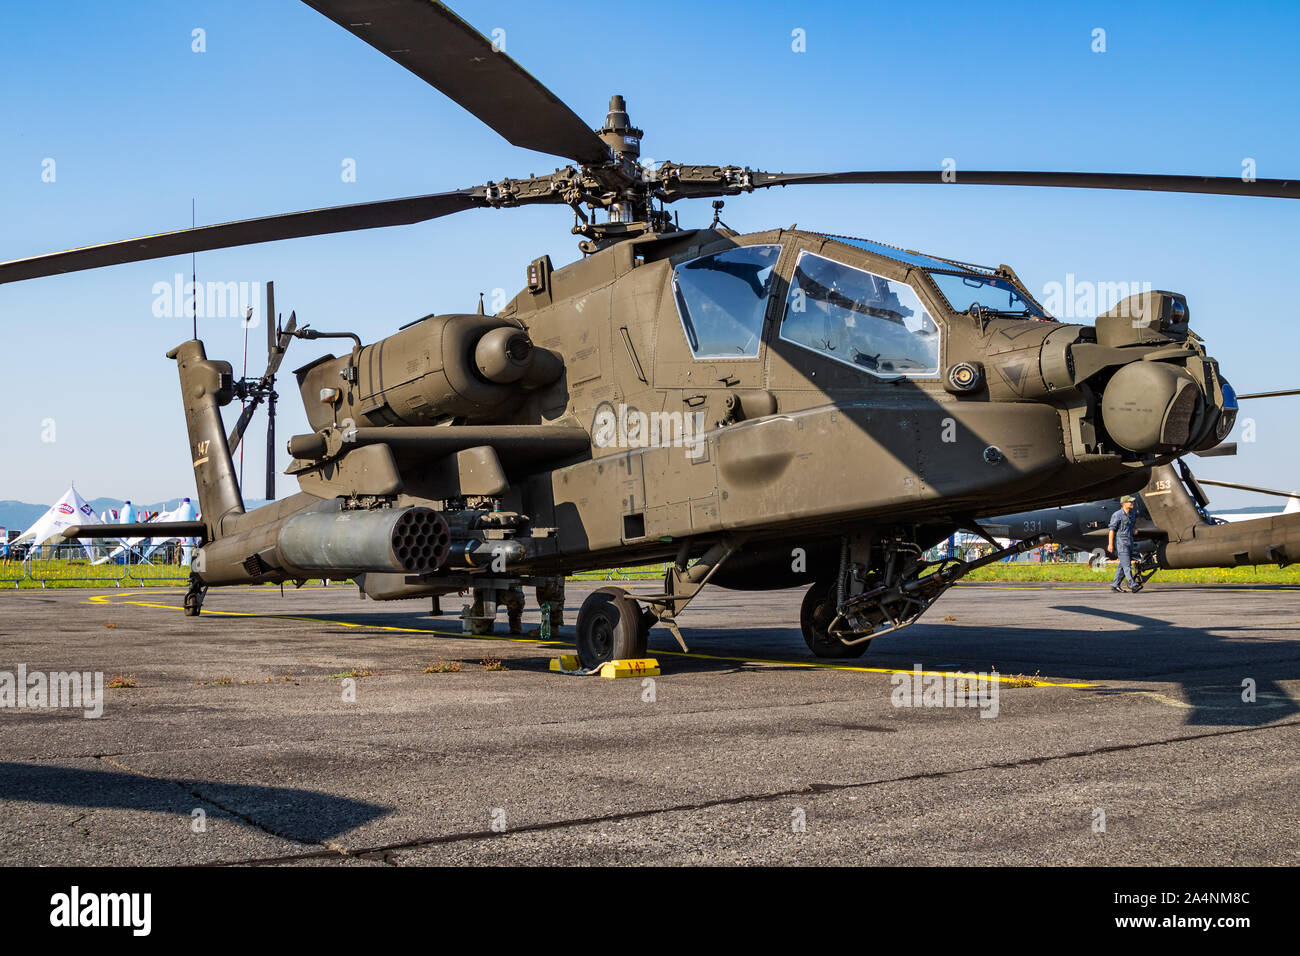 Sliac Slovakia August 3 2019 United States Us Army Boeing Ah 64e Apache Guardian 17 03147 Attack Helicopter Static Display At Siaf Slovak Intern Stock Photo Alamy